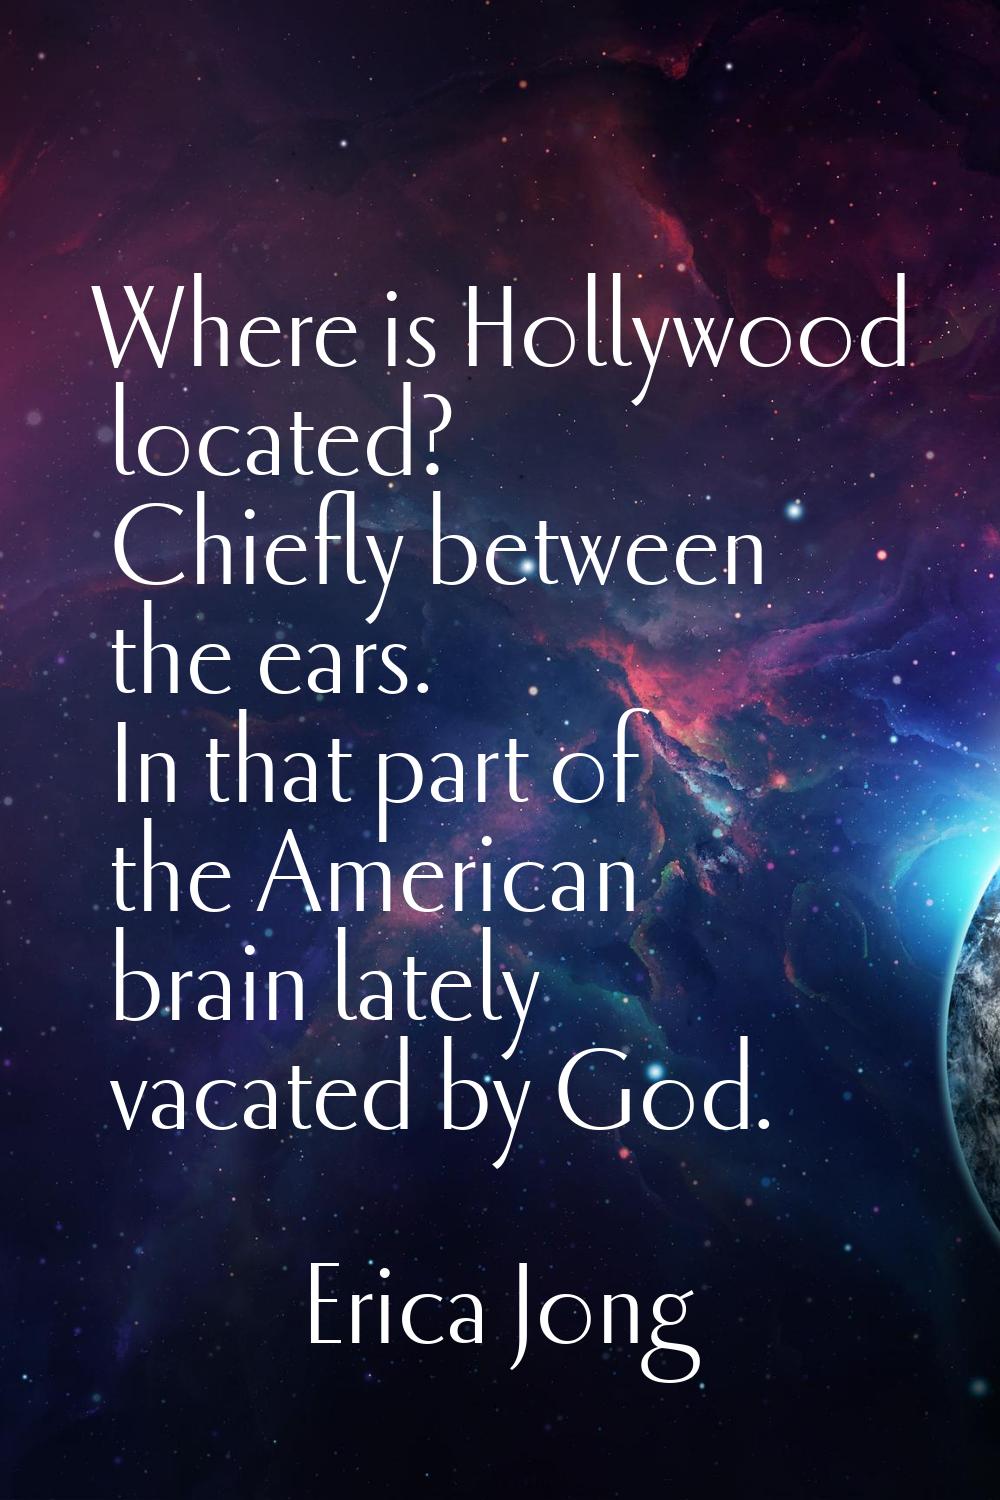 Where is Hollywood located? Chiefly between the ears. In that part of the American brain lately vac